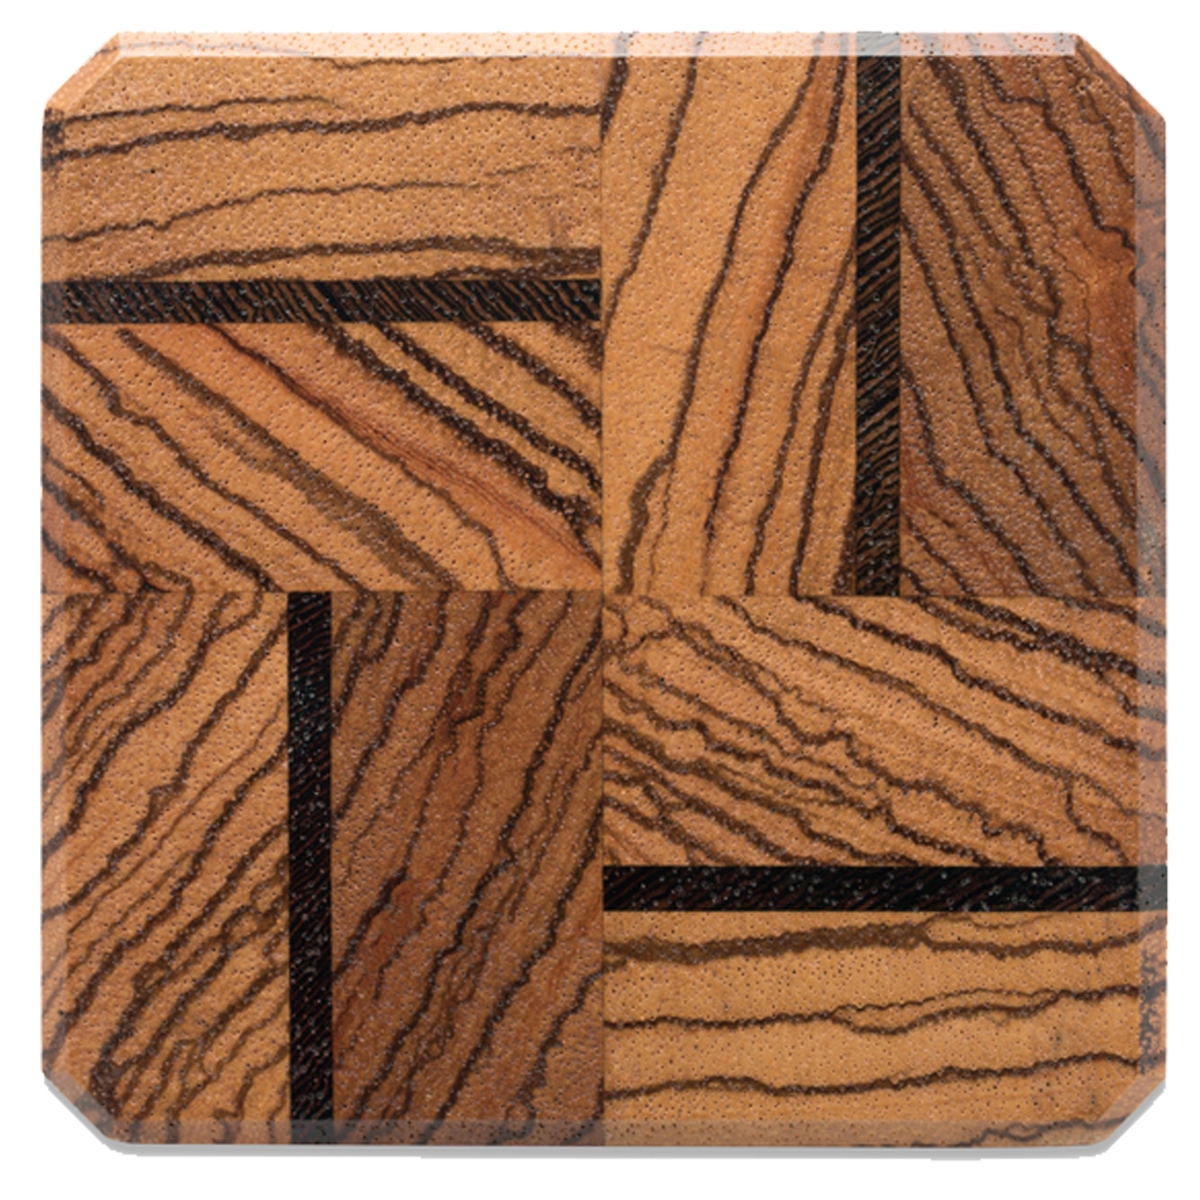 Picture of A & E Millwork AEM-5045 Single Tiger & Wenge Wood Coasters